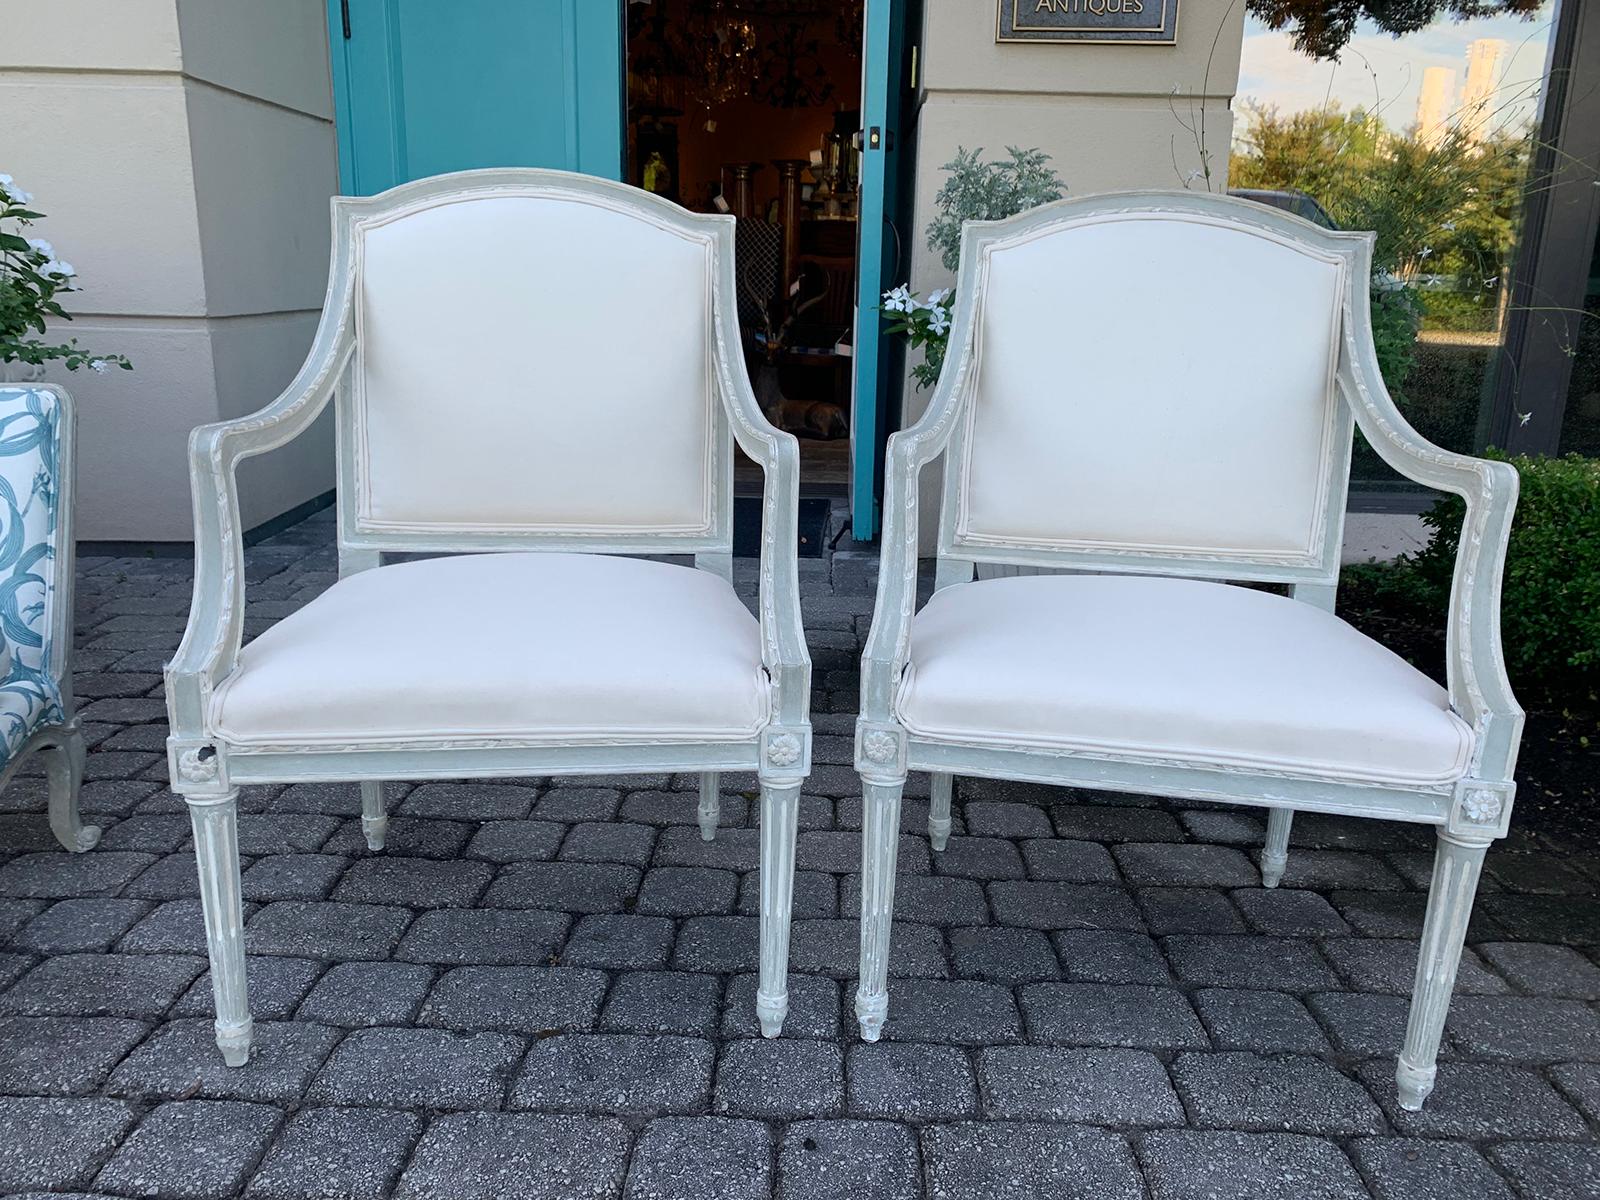 Pair of 20th century neoclassical armchairs with custom finish
Measures: 25